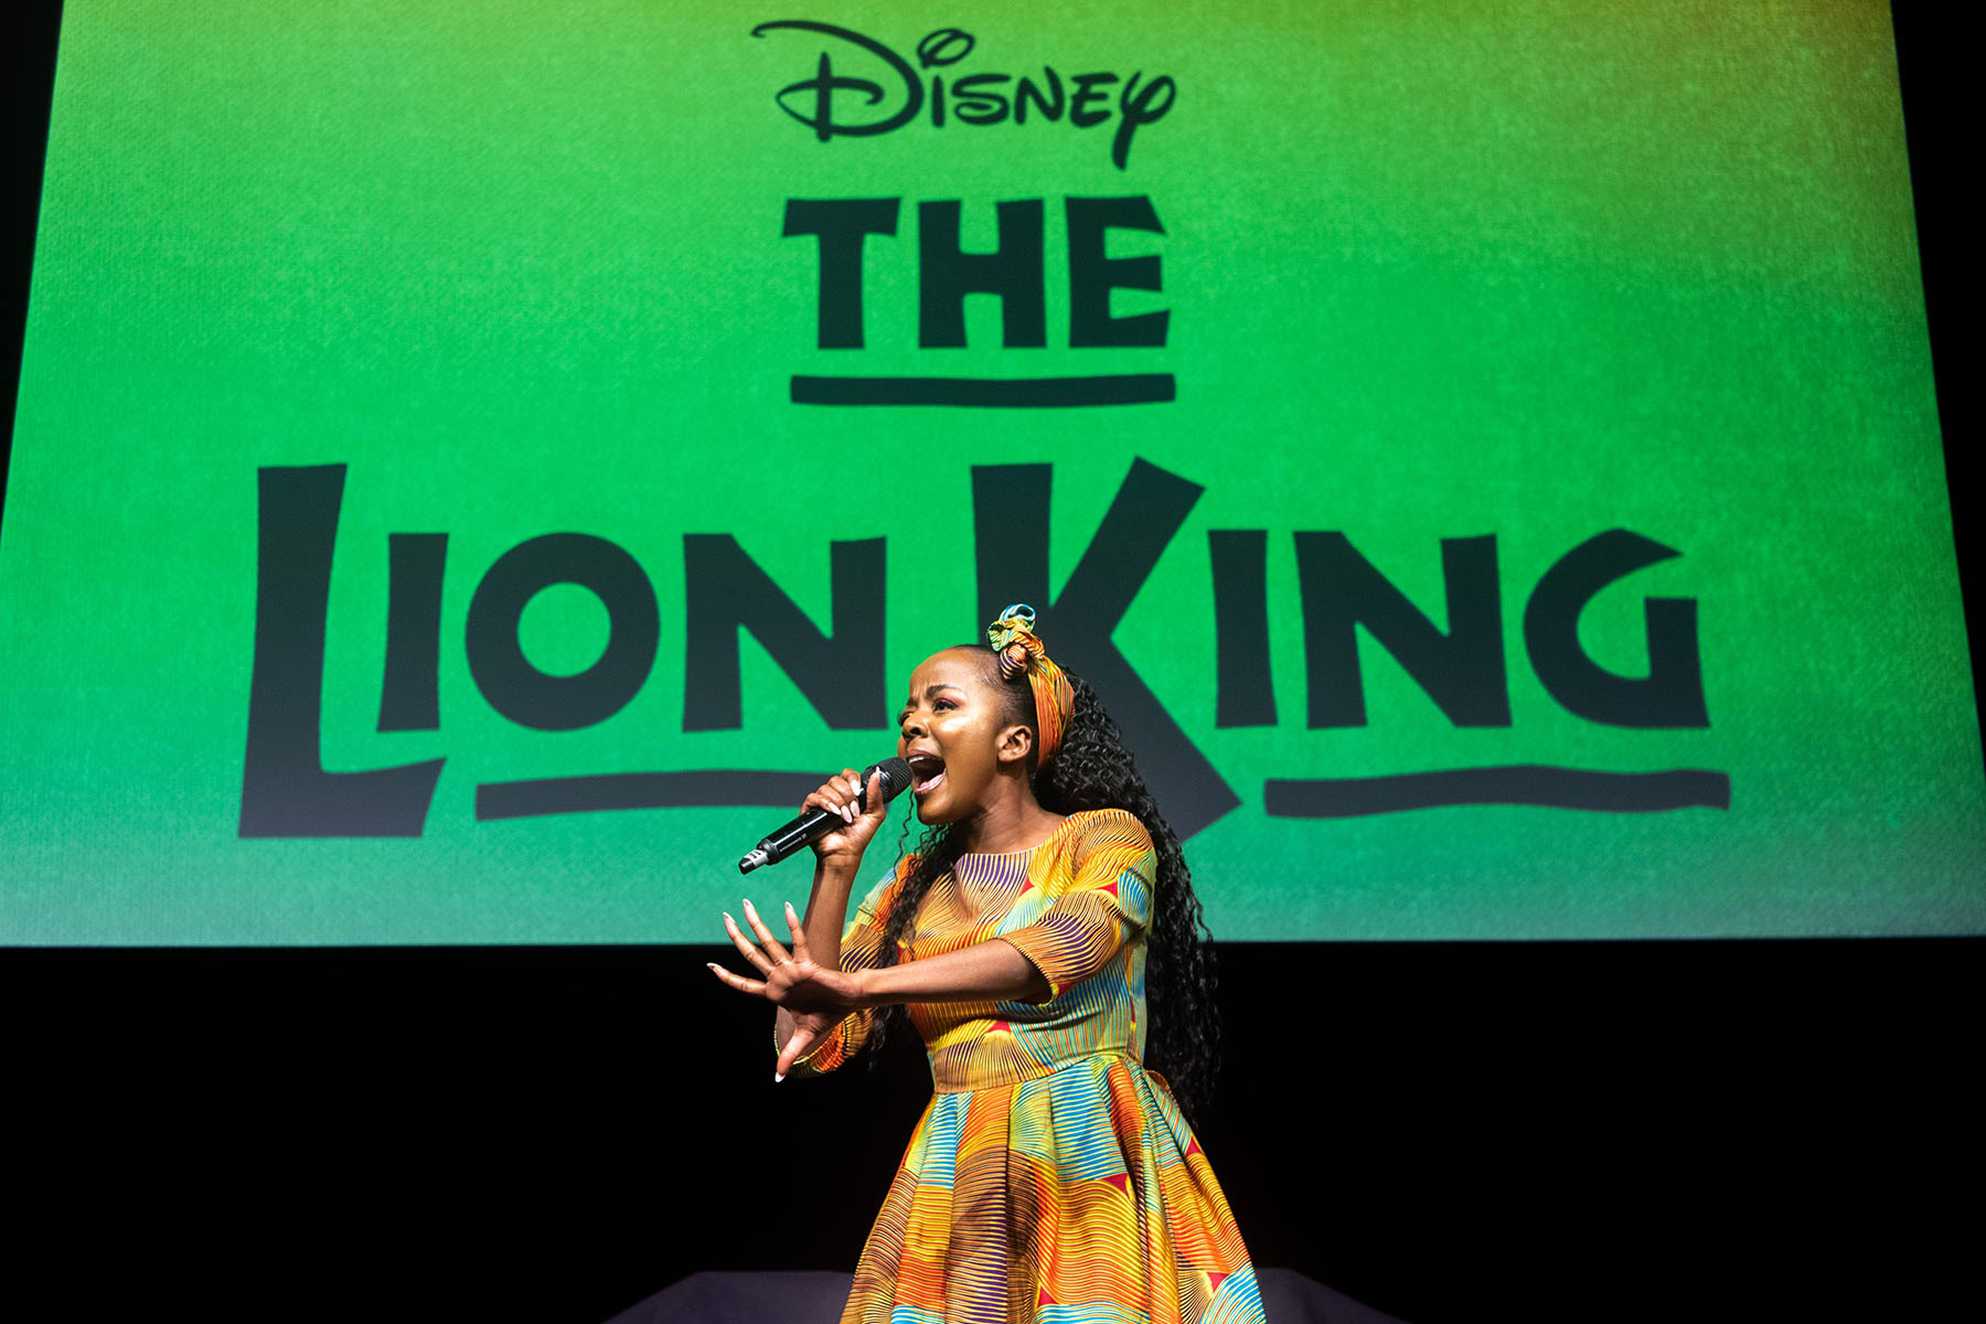 A performer from the cast of Lion King: The Musical performing a number from the show at the 2022 Make-A-Wish Ball.